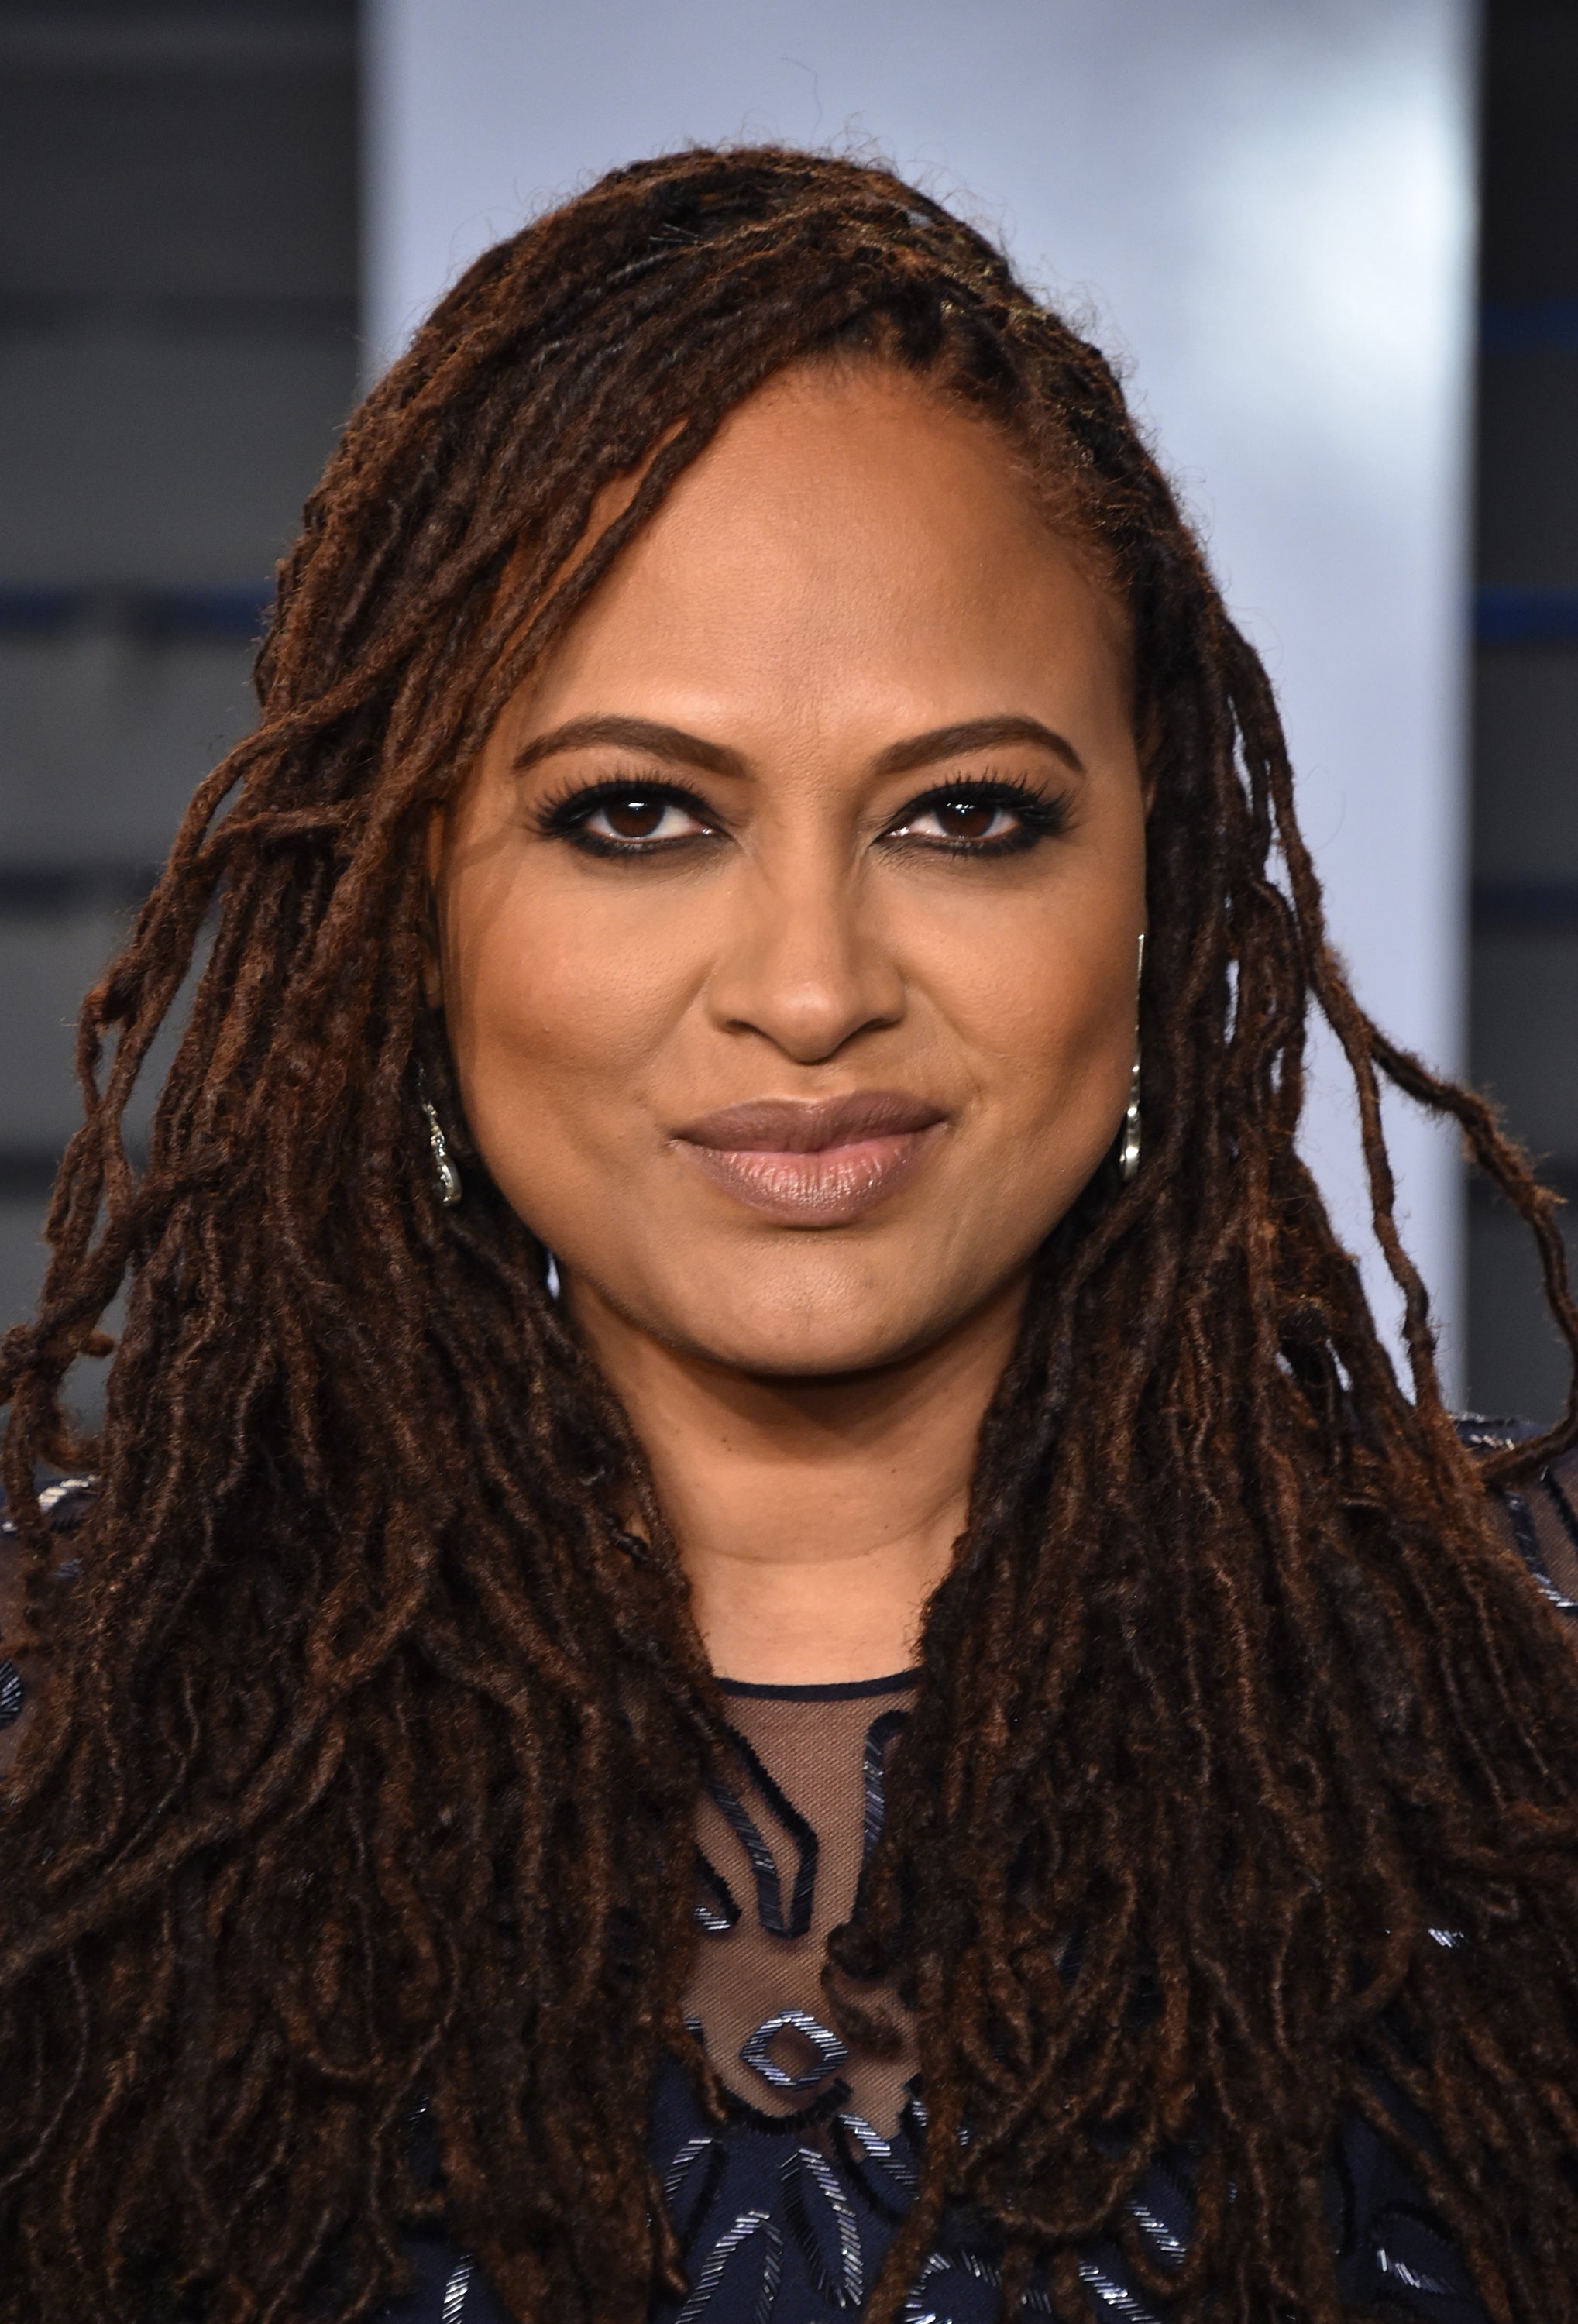 You Have to Add Ava DuVernay's New Film 'August 28' To Your TV Line-Up